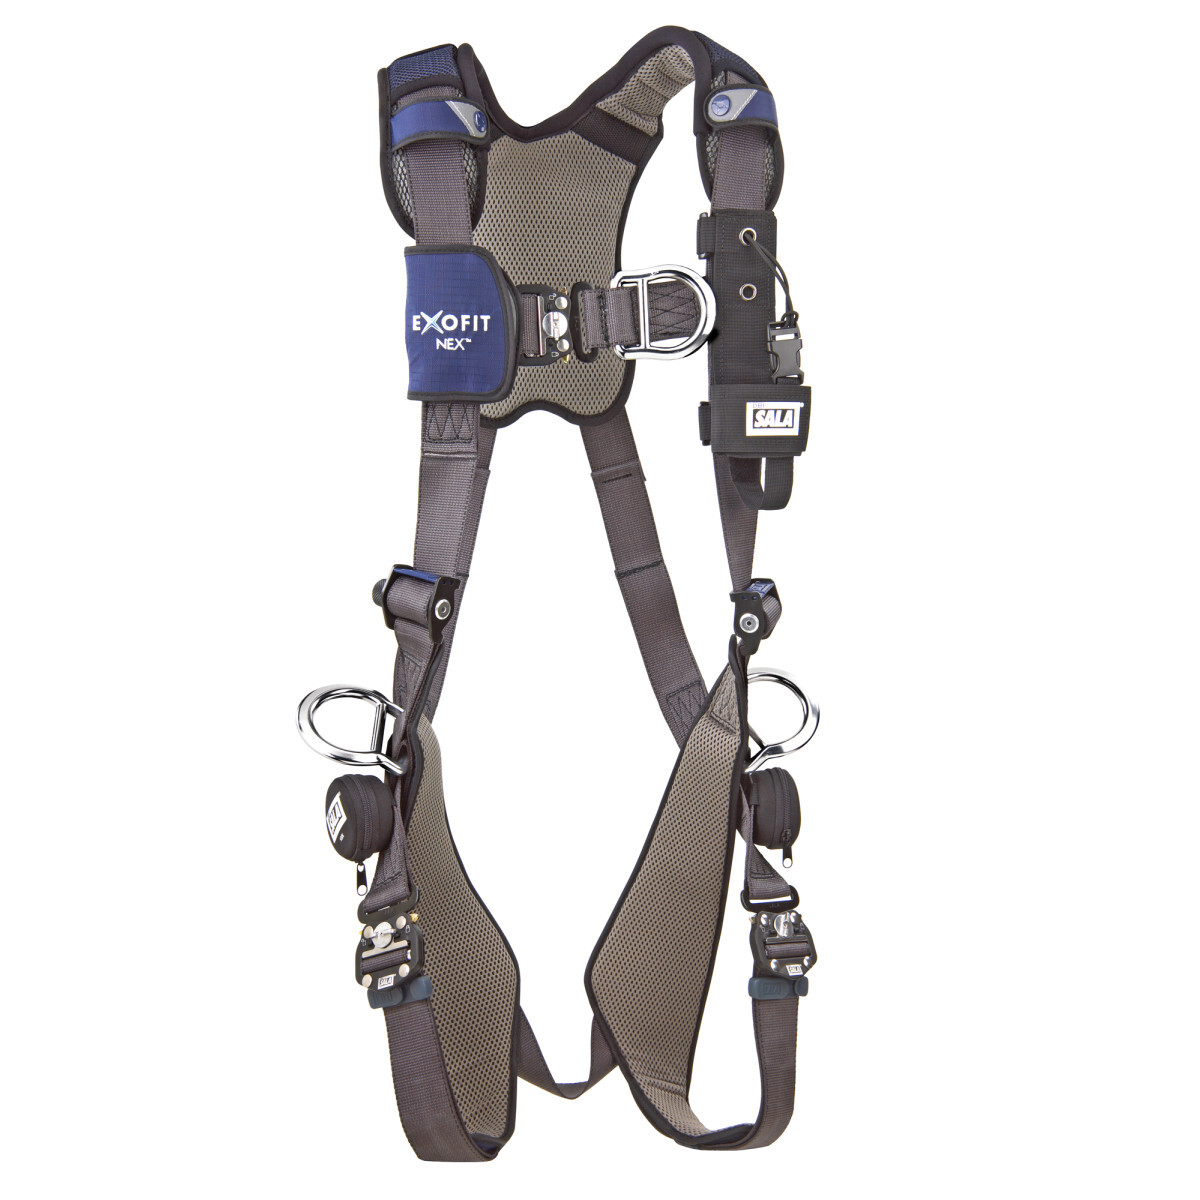 3M™ DBI-SALA® Small ExoFit NEX™ Full Body/Vest Style Harness With Tech-Lite™ Aluminum Back, Front And Side D-Ring, Duo-Lok™ Quic